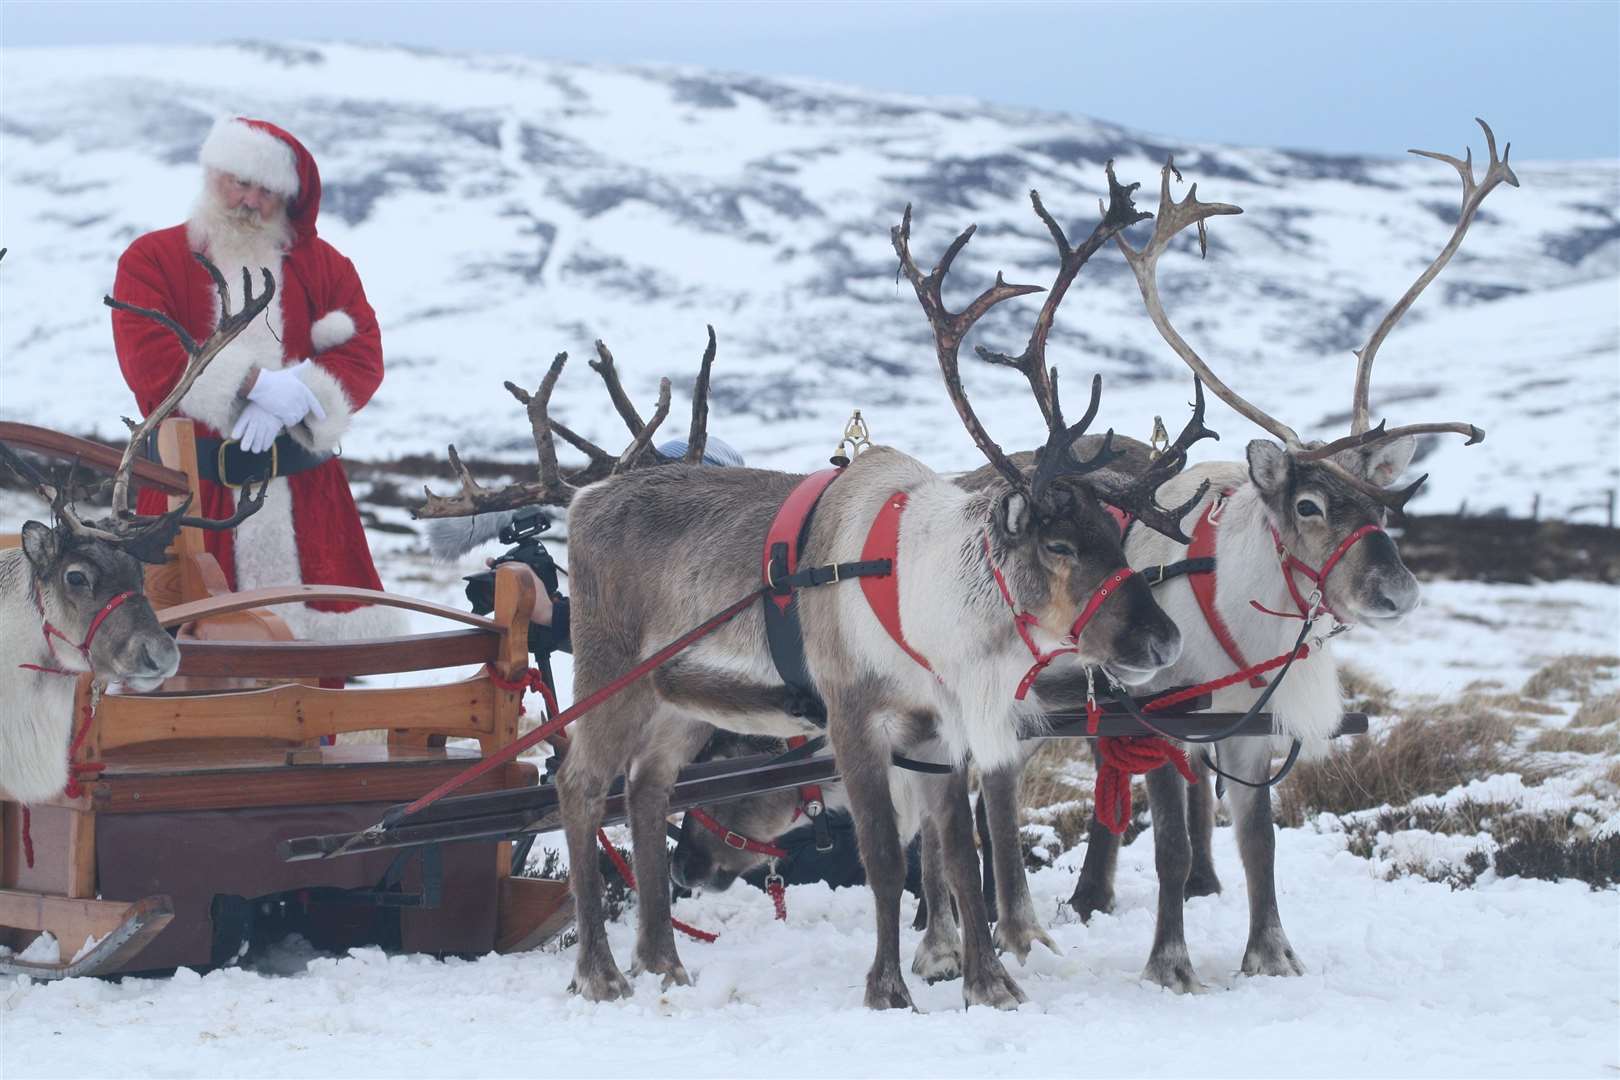 Santa’s sleigh will be pulled along the Main Street at Lairg to the community centre by reindeer from the Cairngorm Reindeer Centre/ Picure: Alex Smith.